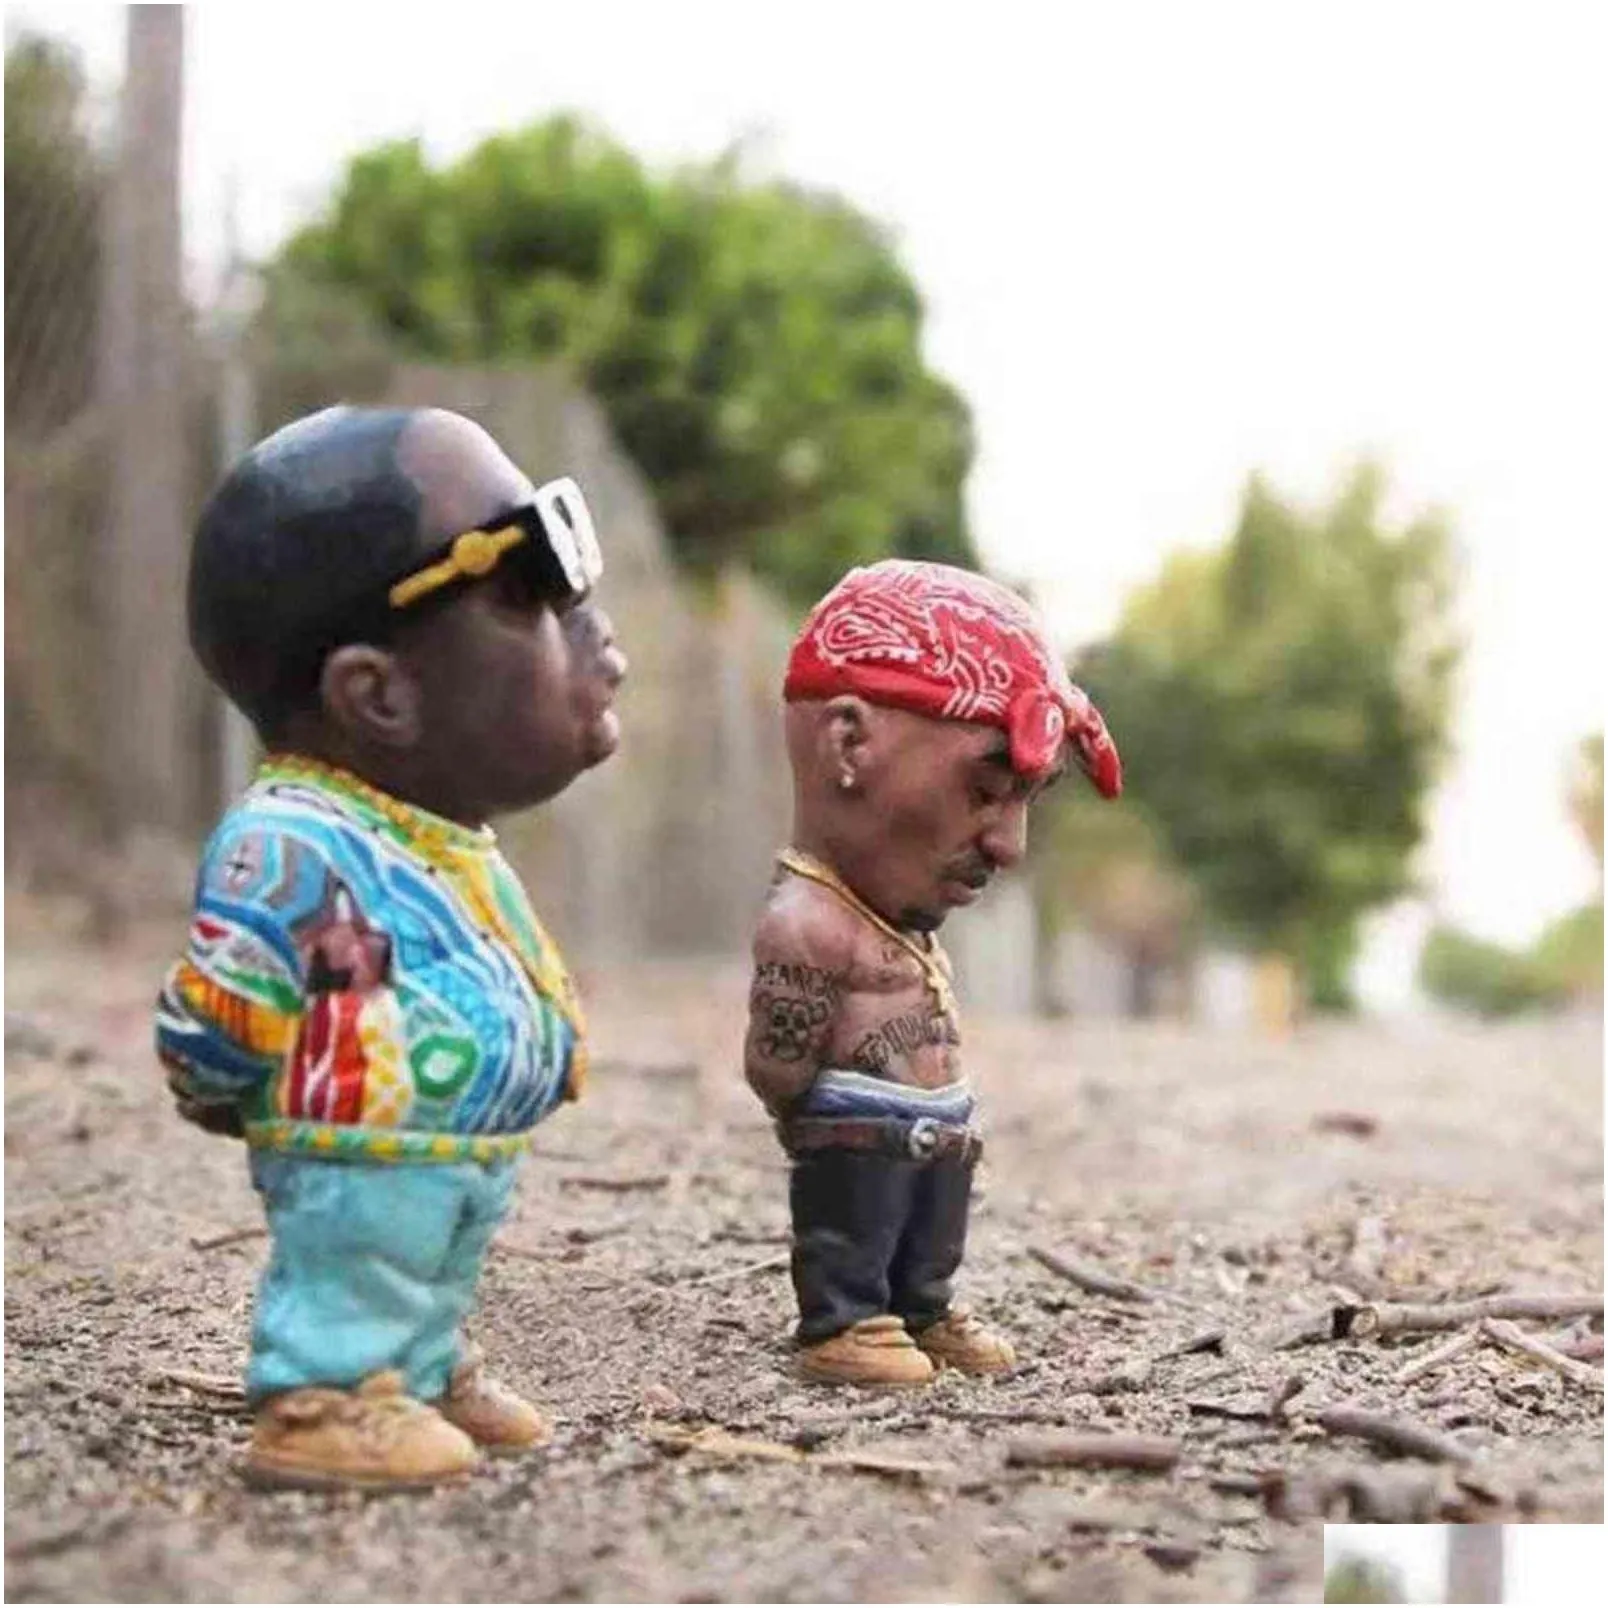 mini resin ornaments hip hop funny rapper bro figurine set for home indoor outdoor decorations party 211101